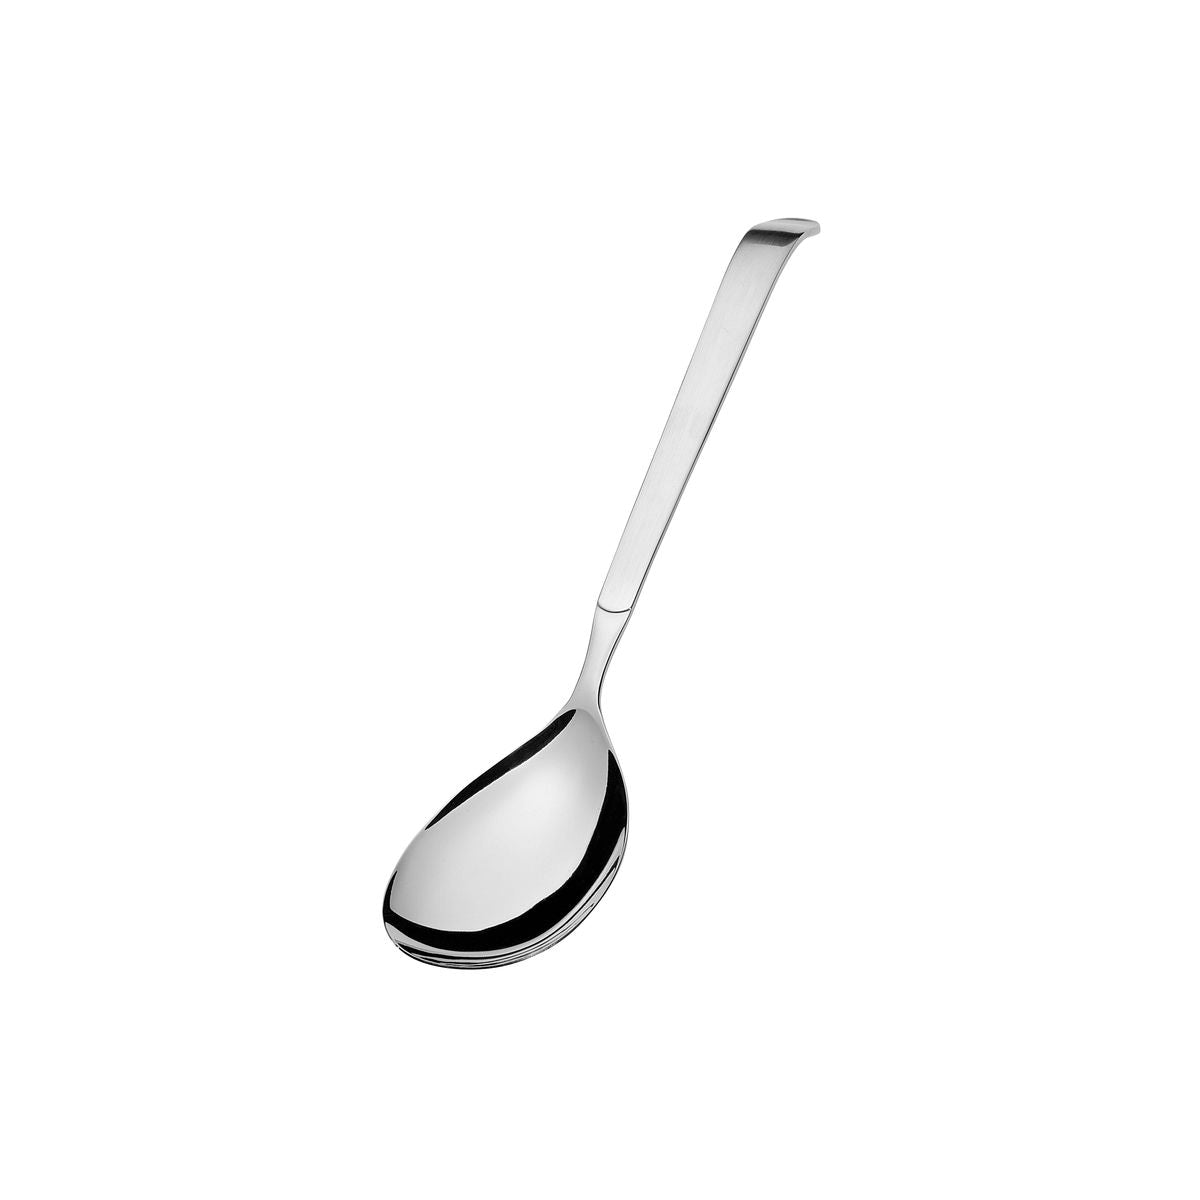 Salad Serving Spoon Satin - 296Mm, Buffet from Amefa. made out of Stainless Steel and sold in boxes of 1. Hospitality quality at wholesale price with The Flying Fork! 